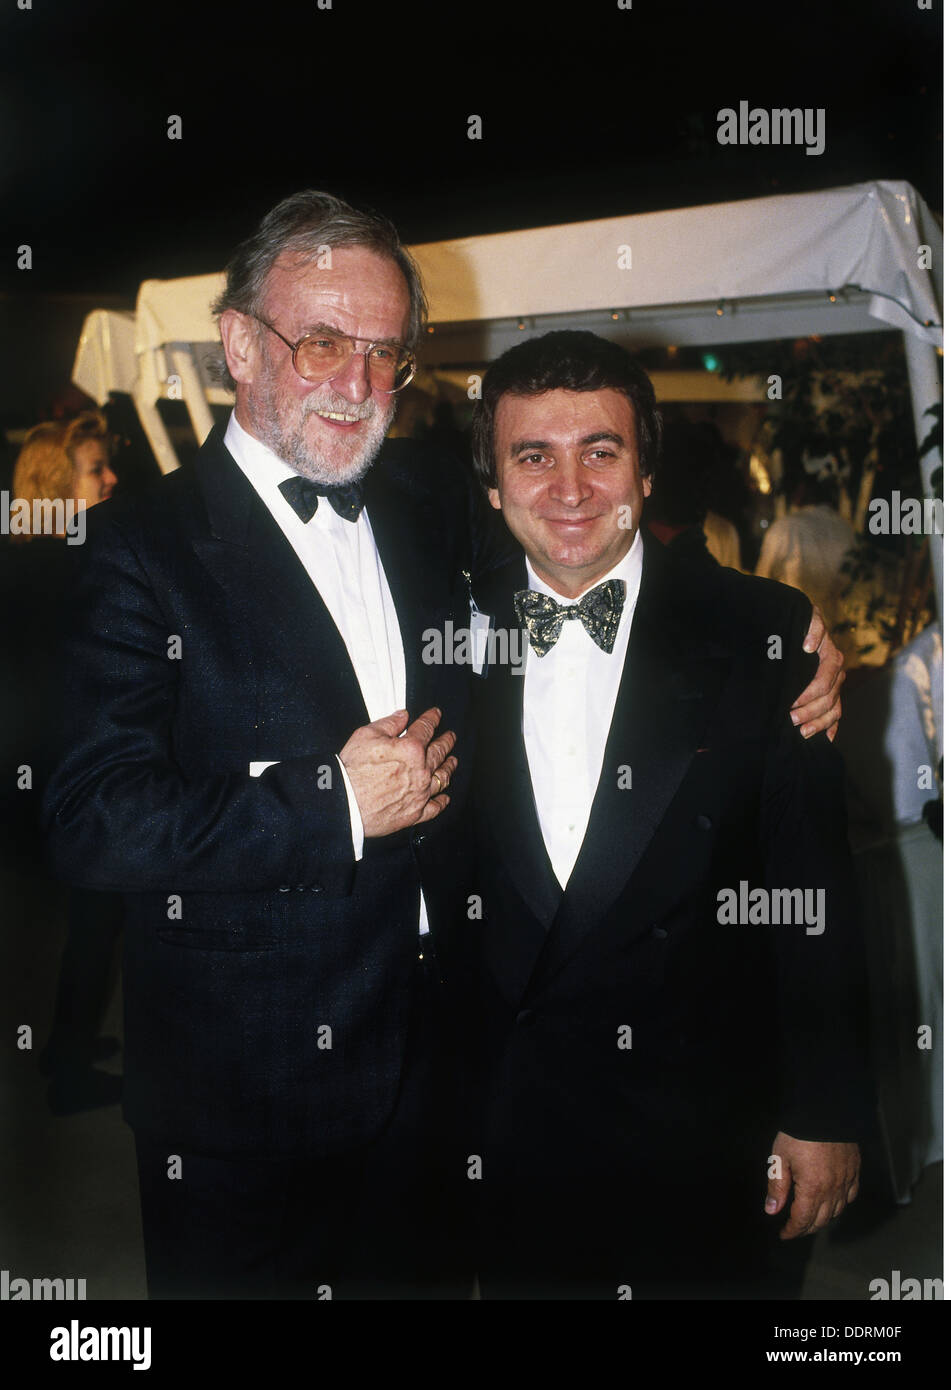 Avram, Marcel, * 1.3.1938, chief of the agency 'Mama Concerts', half length, with Fritz Rau, during the concert of the trio Sammy Davis Jr., Frank Sinatra and Liza Minnelli, 'Ultimate Event Tour', Olympics Hall, Munich, 2.5.1989, Stock Photo